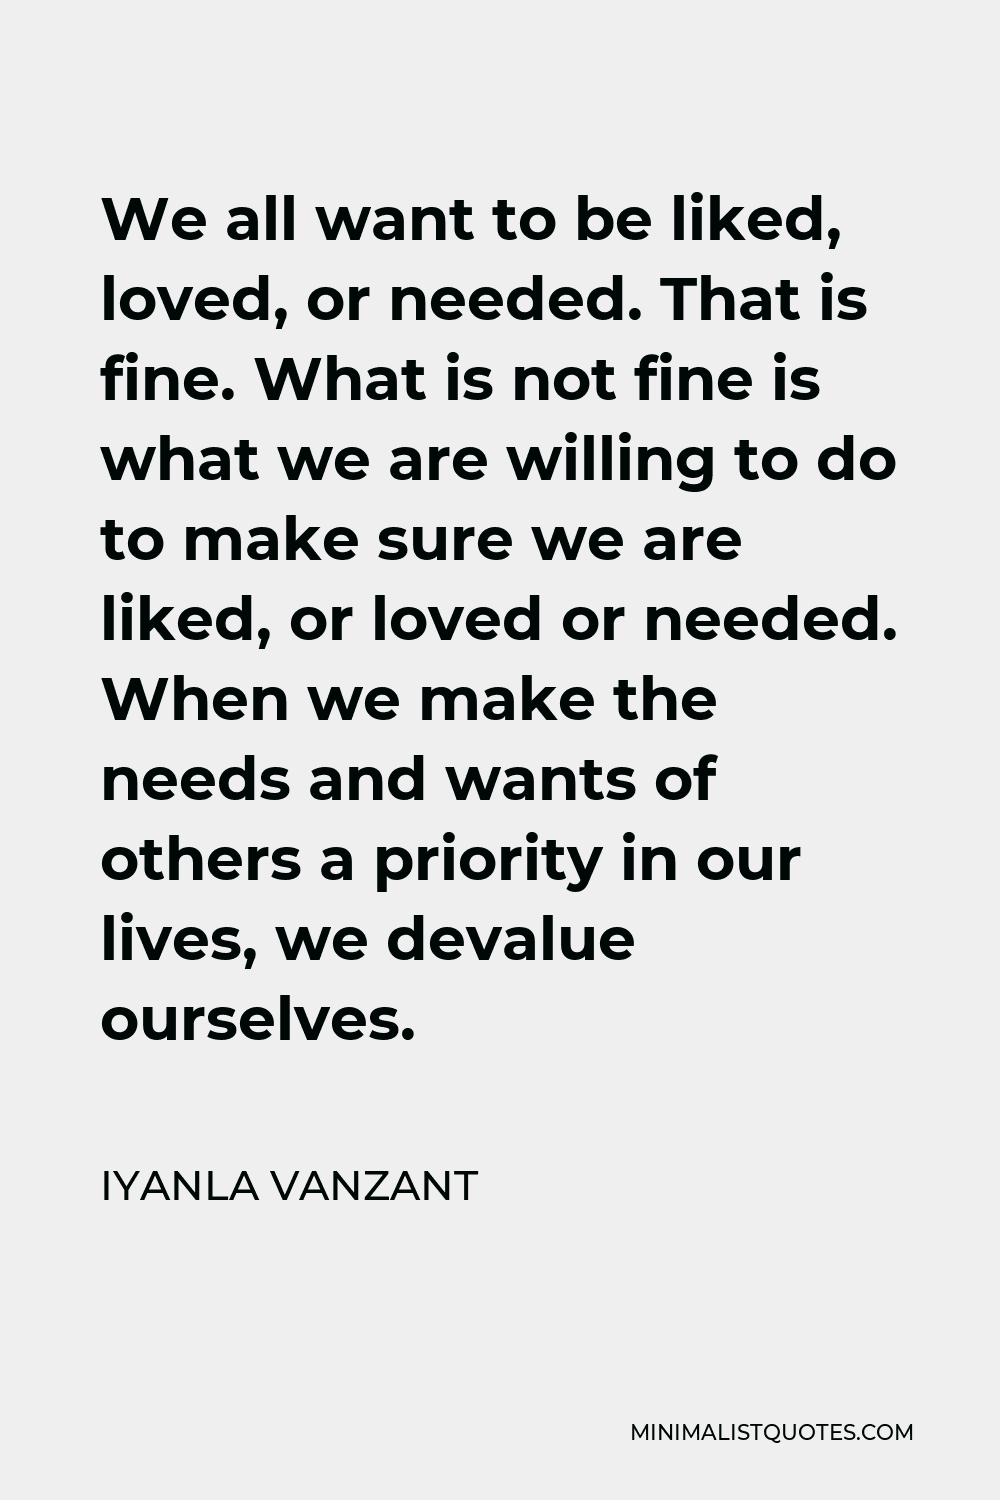 Iyanla Vanzant Quote - We all want to be liked, loved, or needed. That is fine. What is not fine is what we are willing to do to make sure we are liked, or loved or needed. When we make the needs and wants of others a priority in our lives, we devalue ourselves.